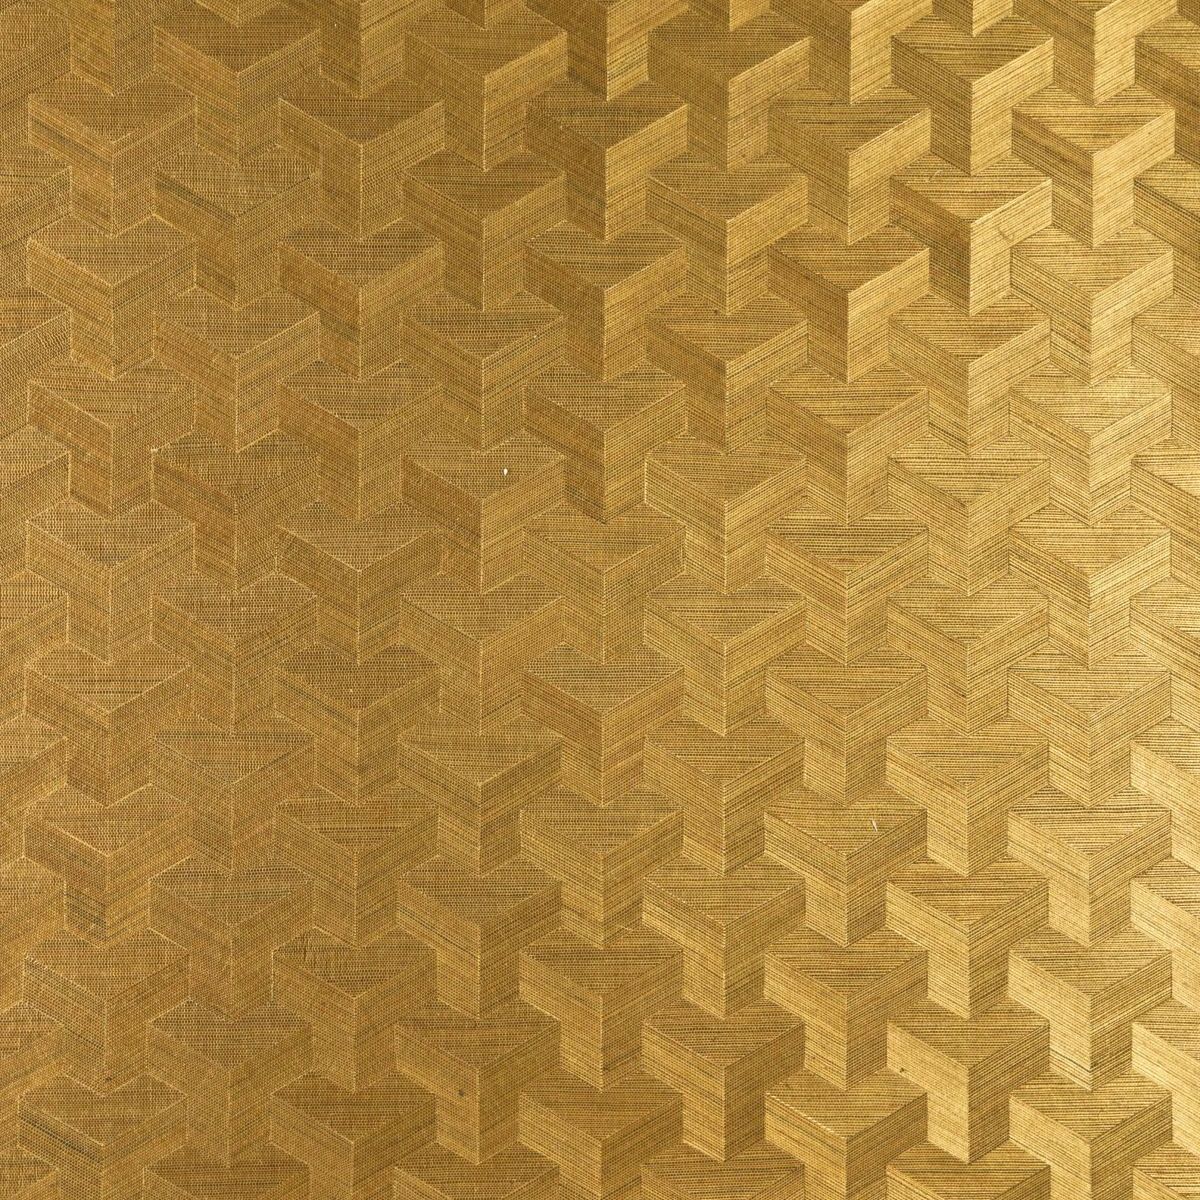 Displaying Image For Gold Art Deco Wallpaper